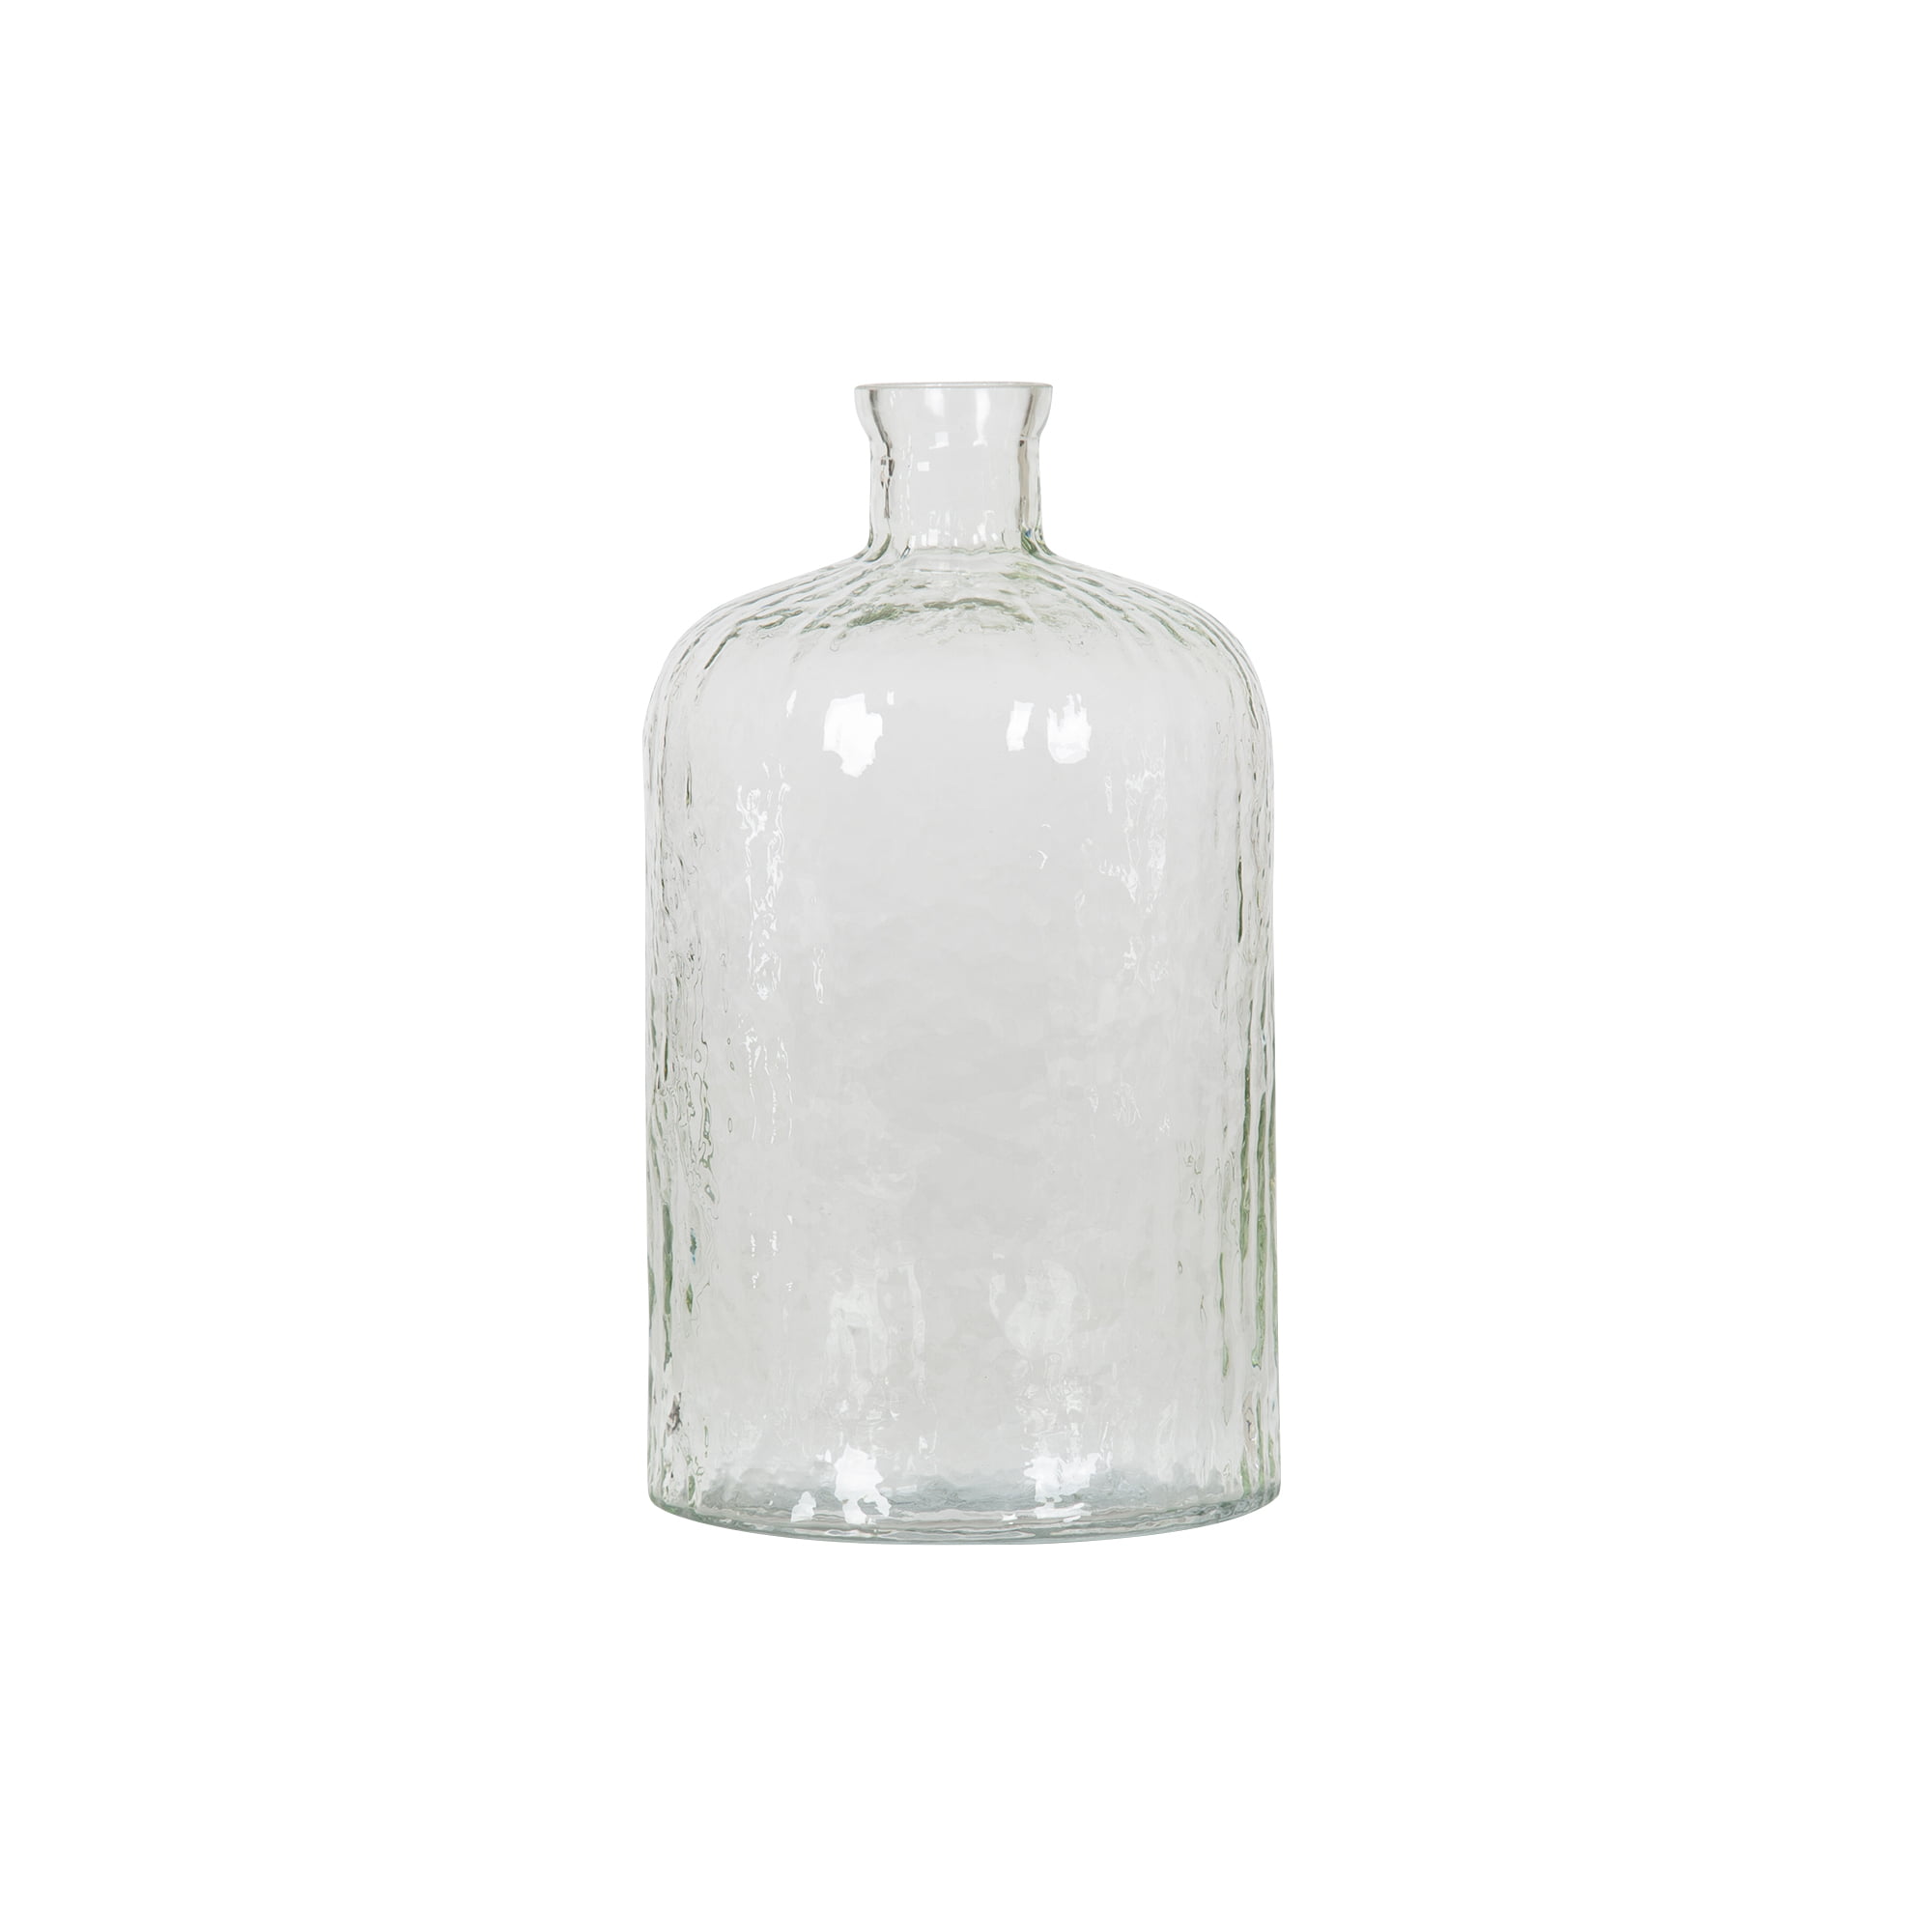 YOU PICK Round Glass Heavy Clear Glass Flower Vases Pots